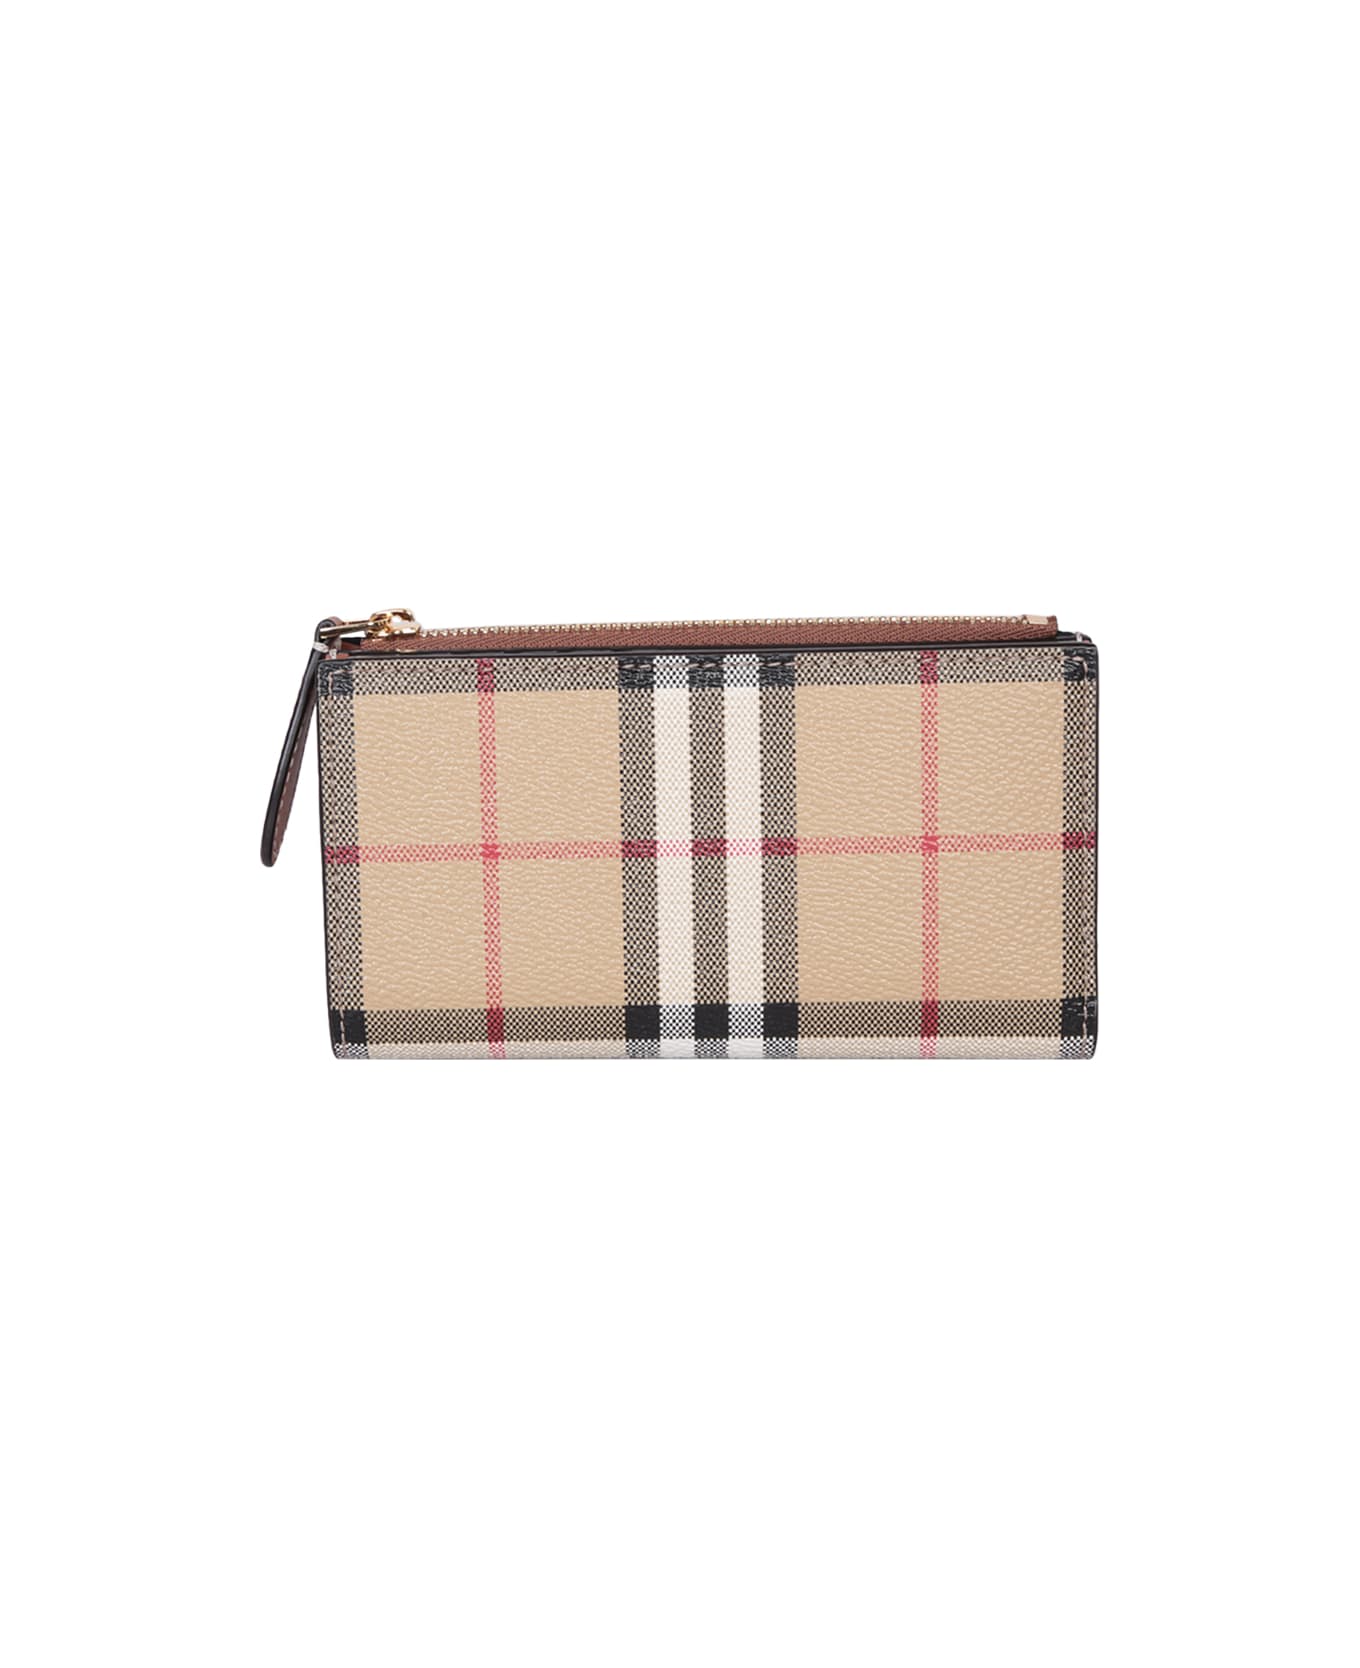 Burberry Archive Check Wallet - Beige